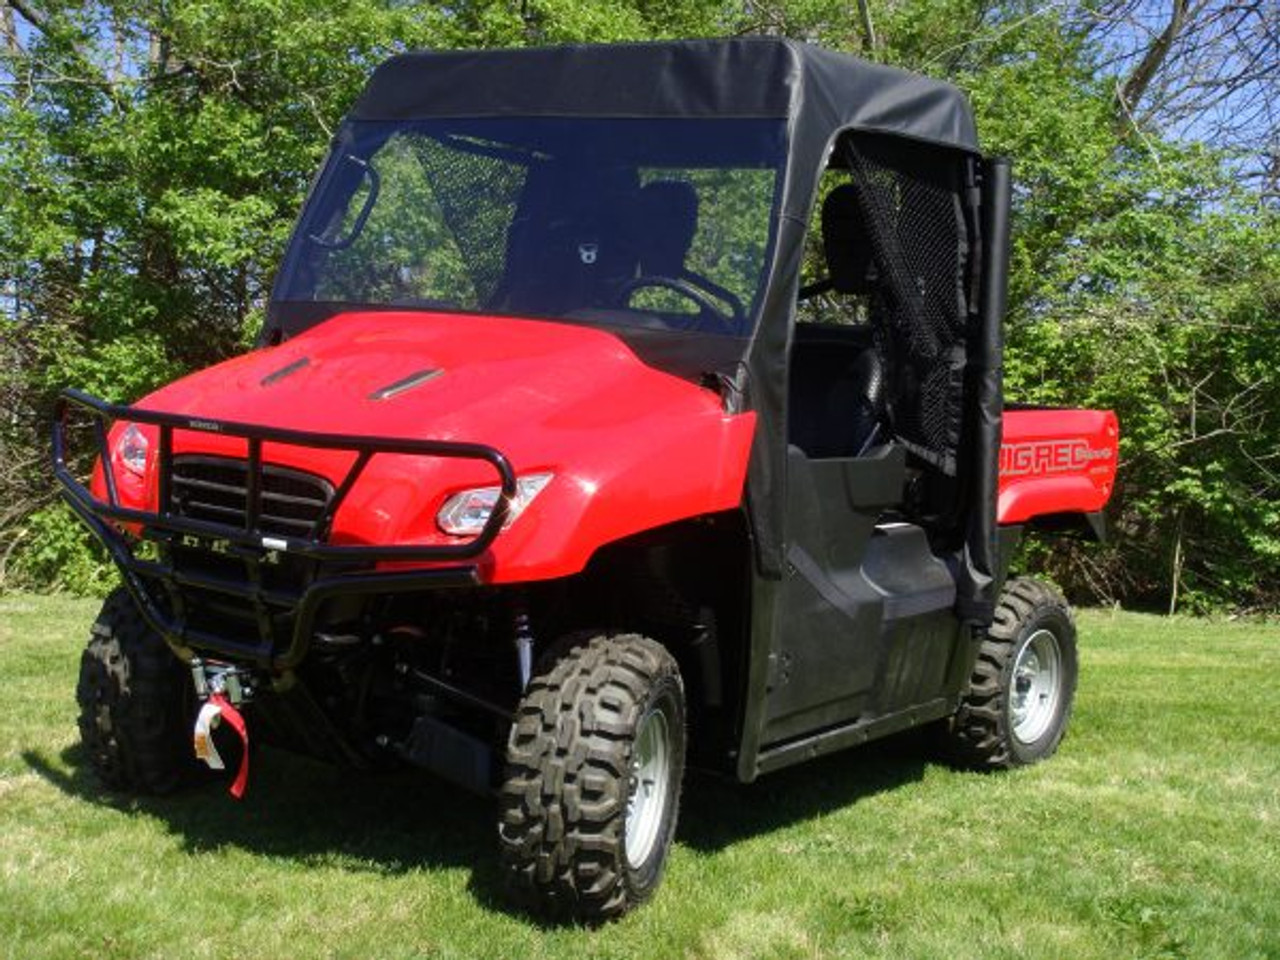 3 Star side x side Honda Big Red full cab enclosure front and side angle view